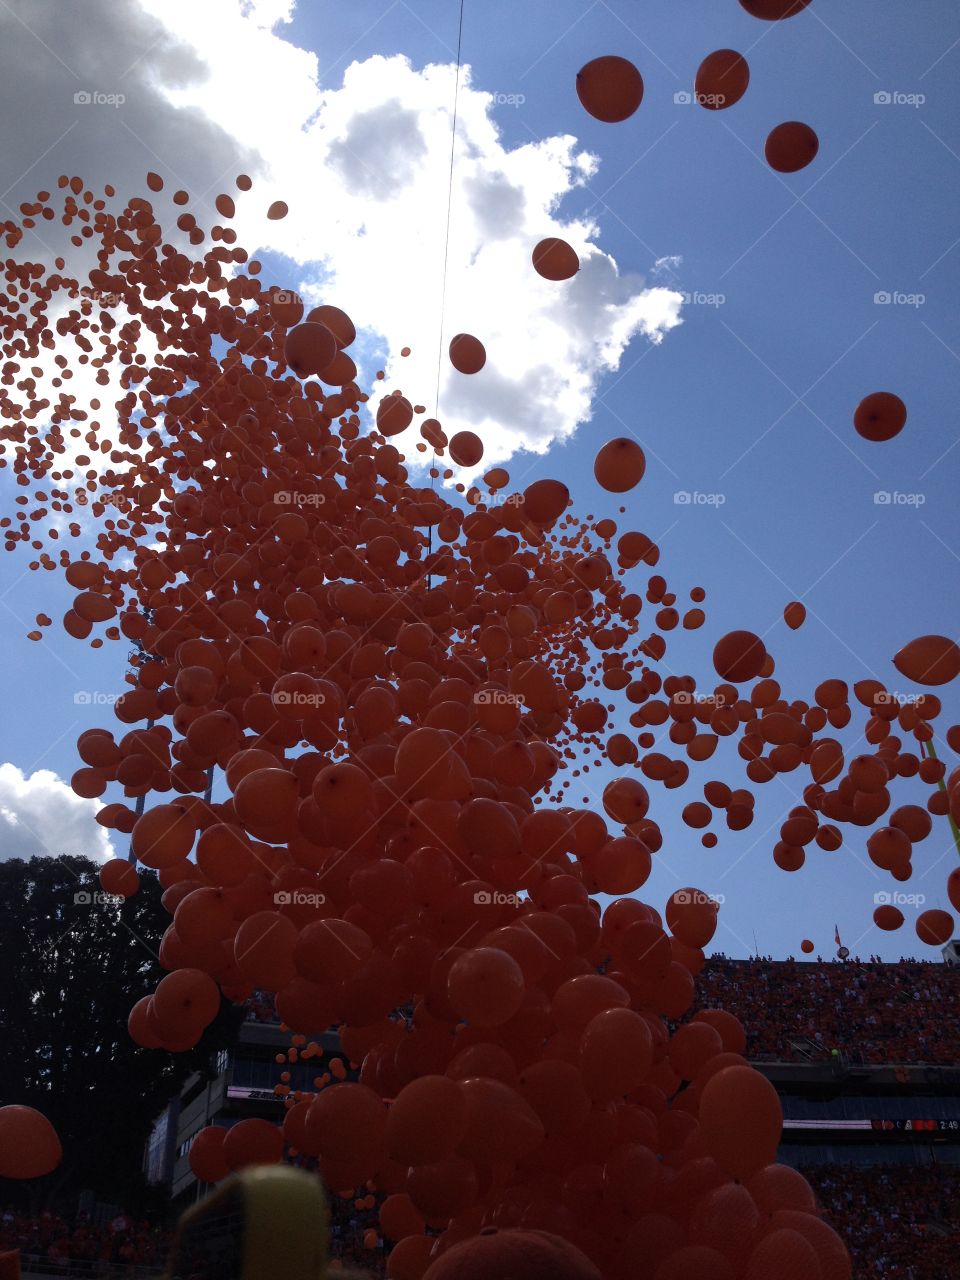 Orange balloons floating into the sky